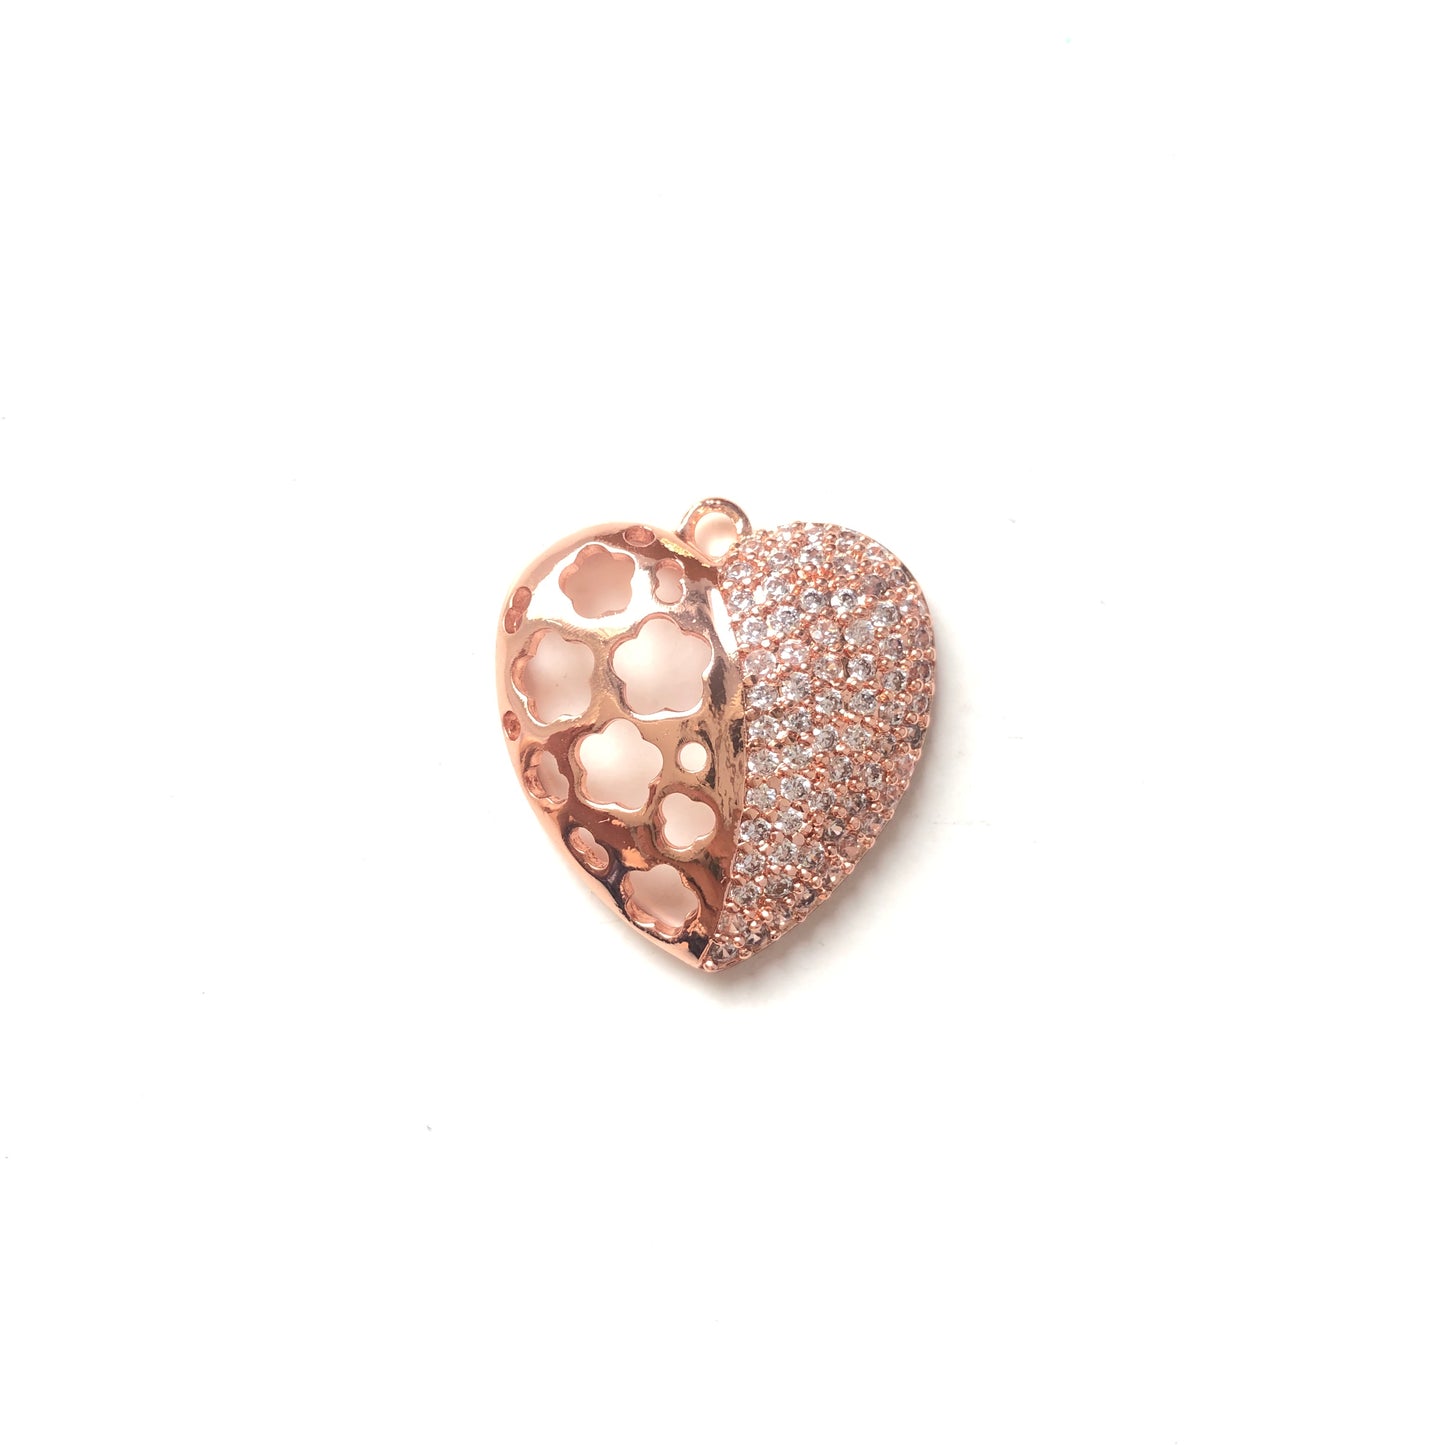 10pcs/lot 24.3*22.8mm CZ Paved Hollow Heart Charms Rose Gold CZ Paved Charms Hearts On Sale Charms Beads Beyond